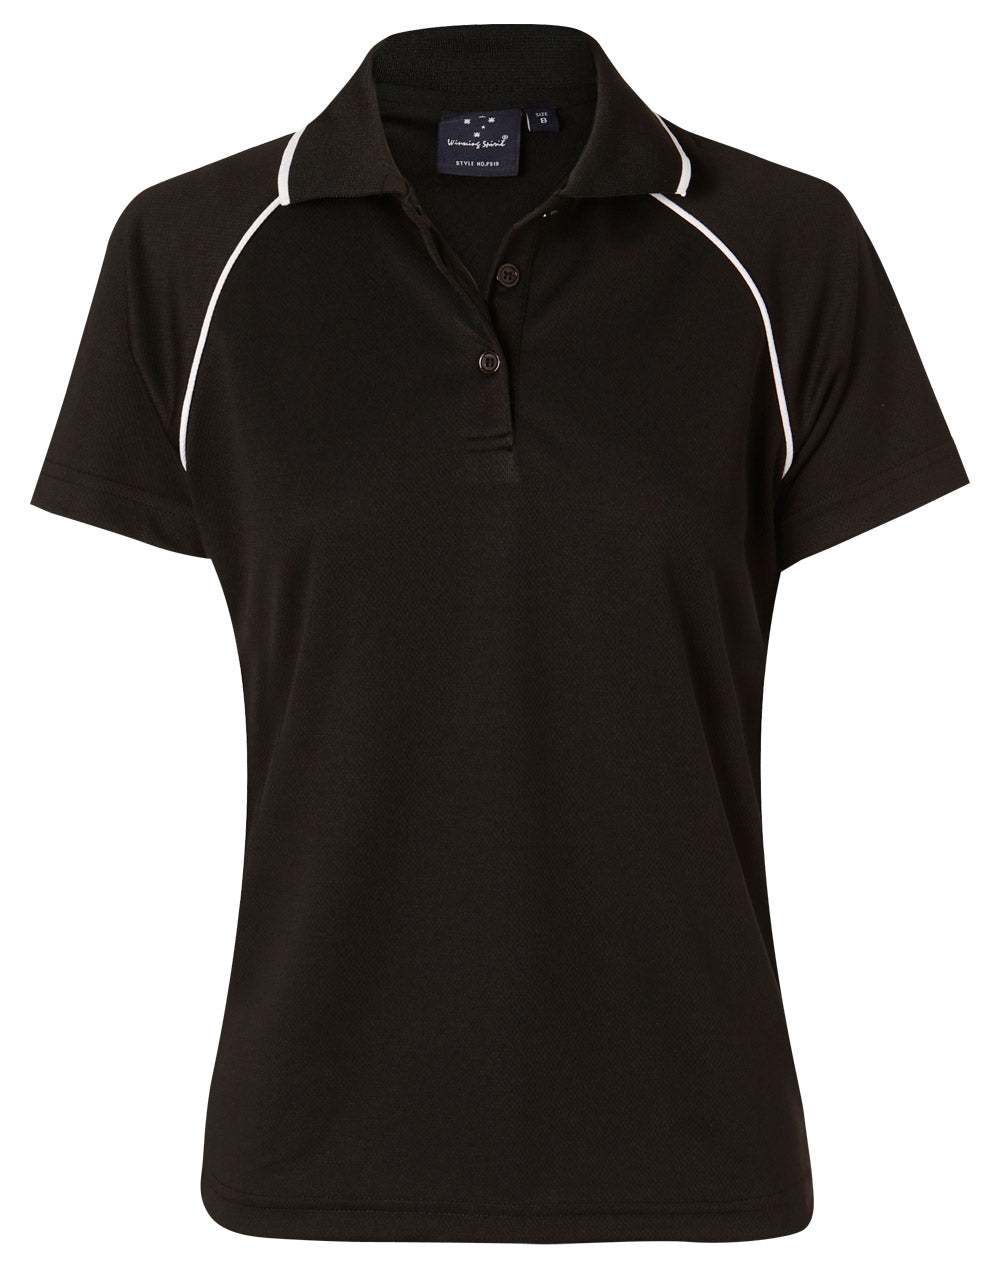 Ladies Cooldry Contrast Polo - made by AIW